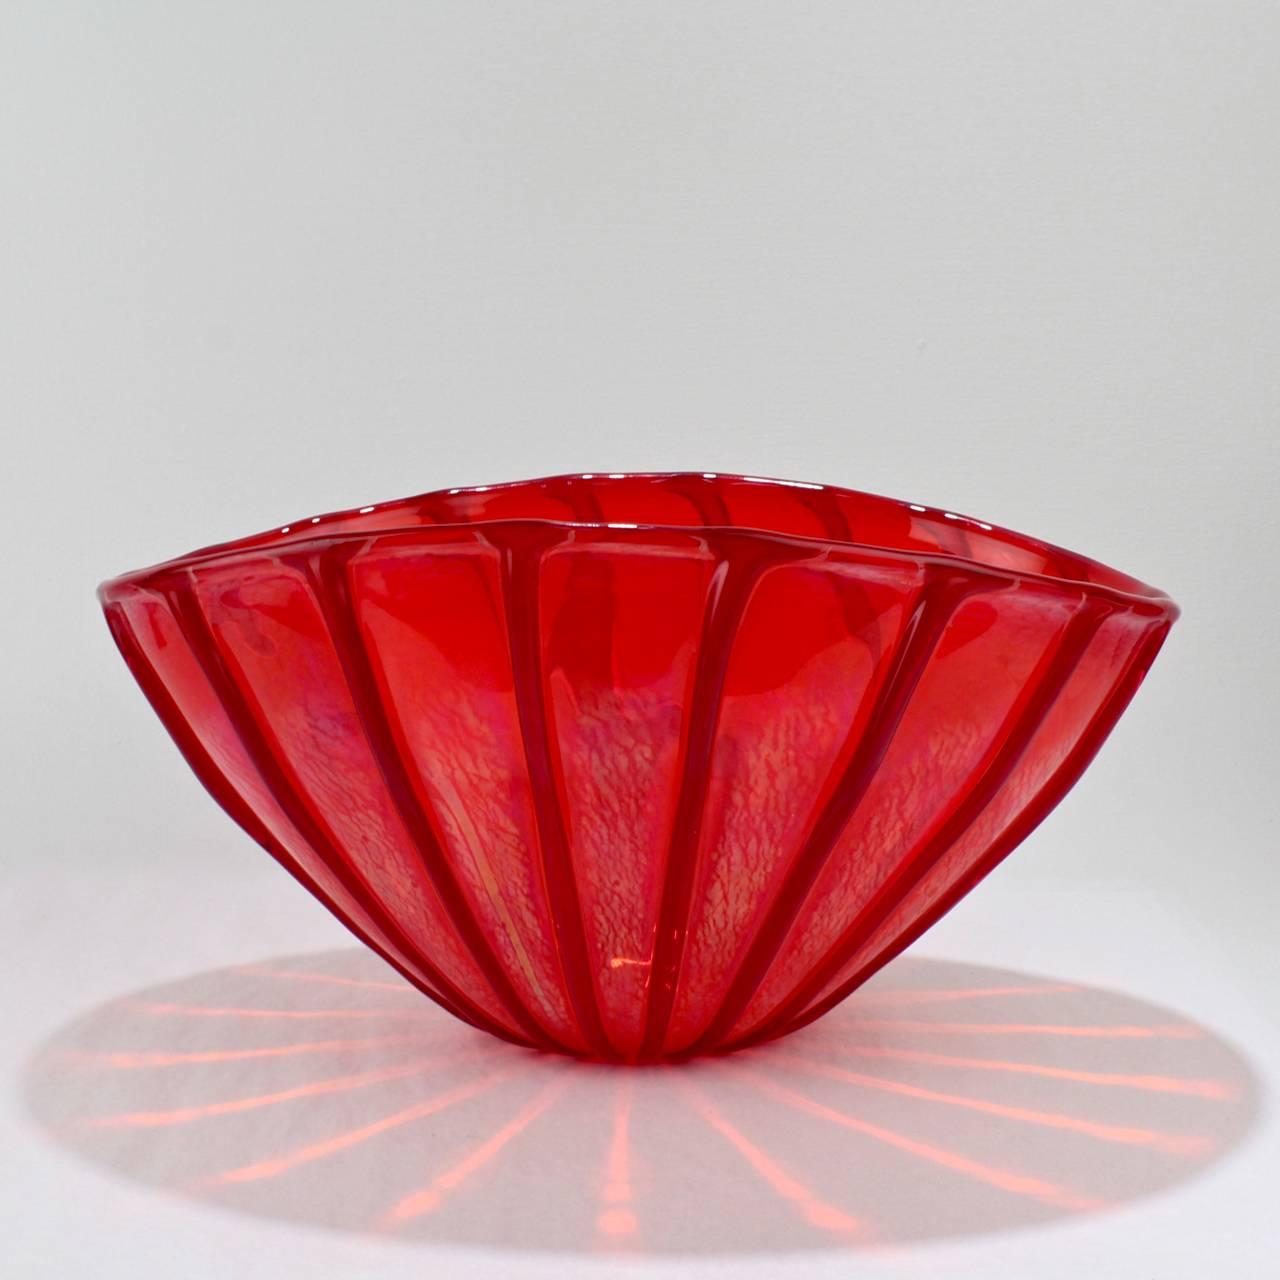 A large Nuance vase (or bowl) in red by Seguso Viro. 

Seguso Viro is the boutique branch of the Seguso brand. It was founded in 1993 as the brainchild of Giampaolo Seguso, son of Archimede. Focused on tradition and artistic impulse, this branch